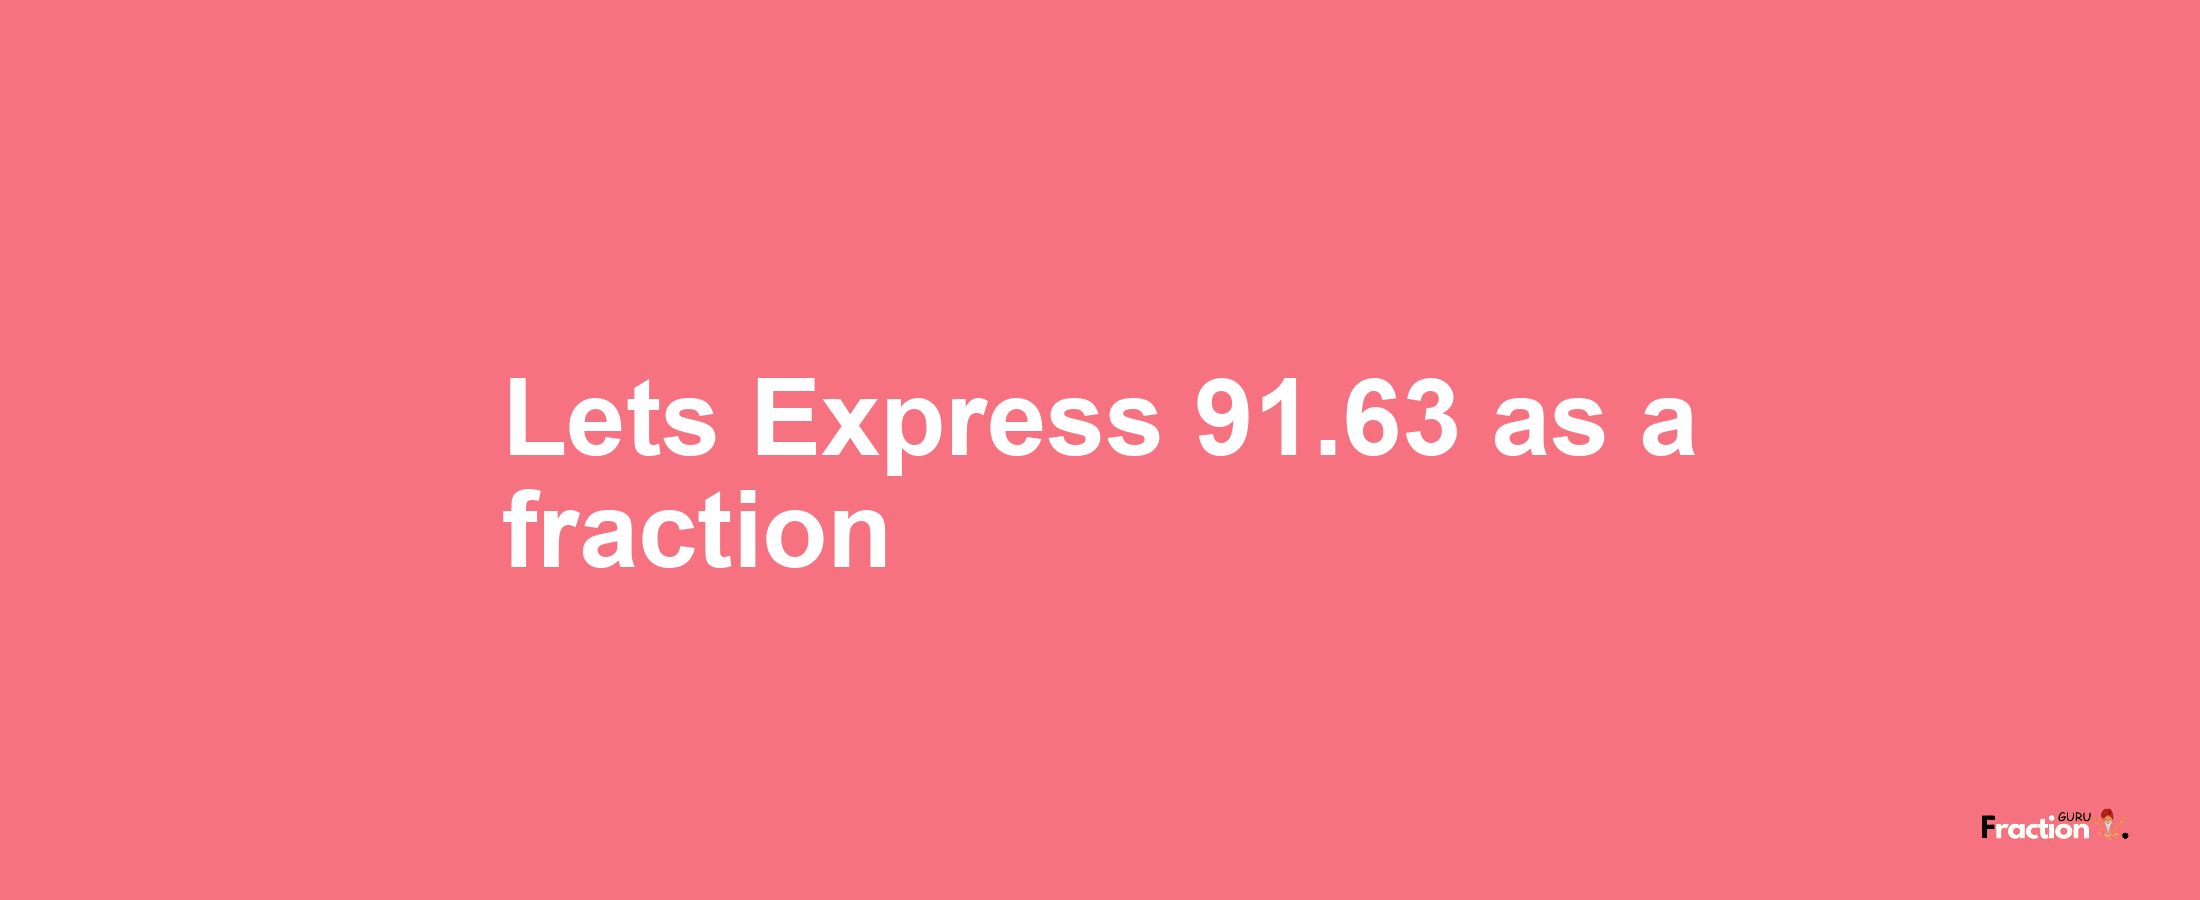 Lets Express 91.63 as afraction